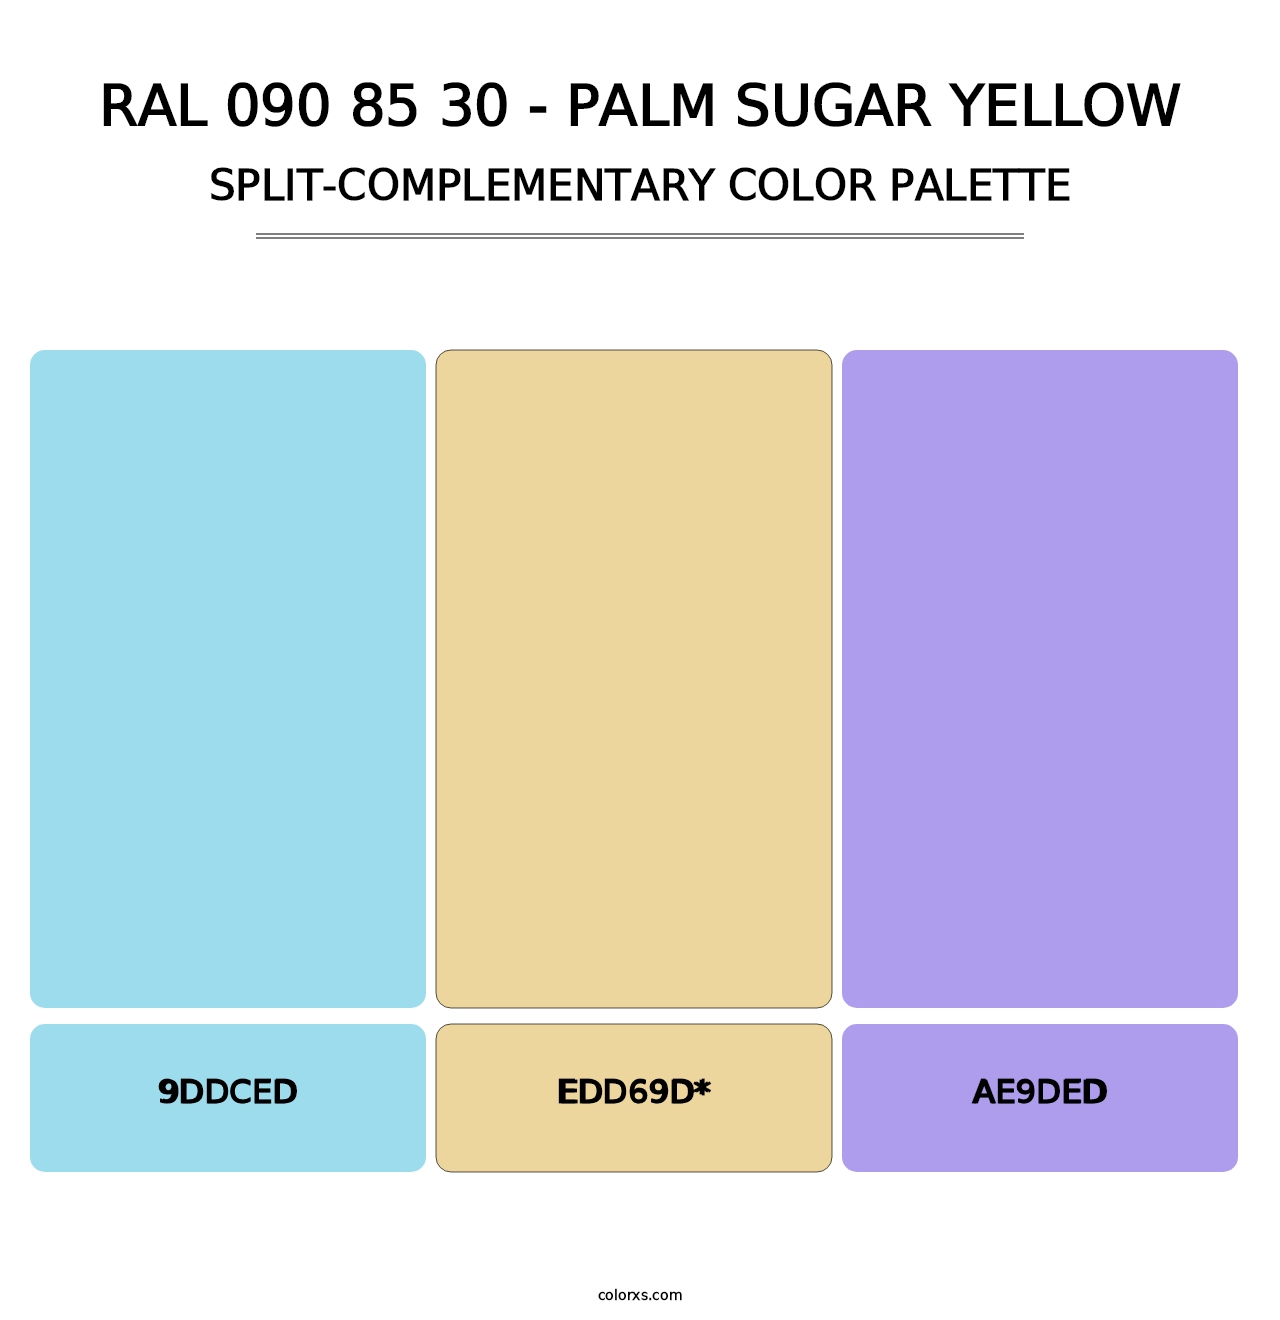 RAL 090 85 30 - Palm Sugar Yellow - Split-Complementary Color Palette